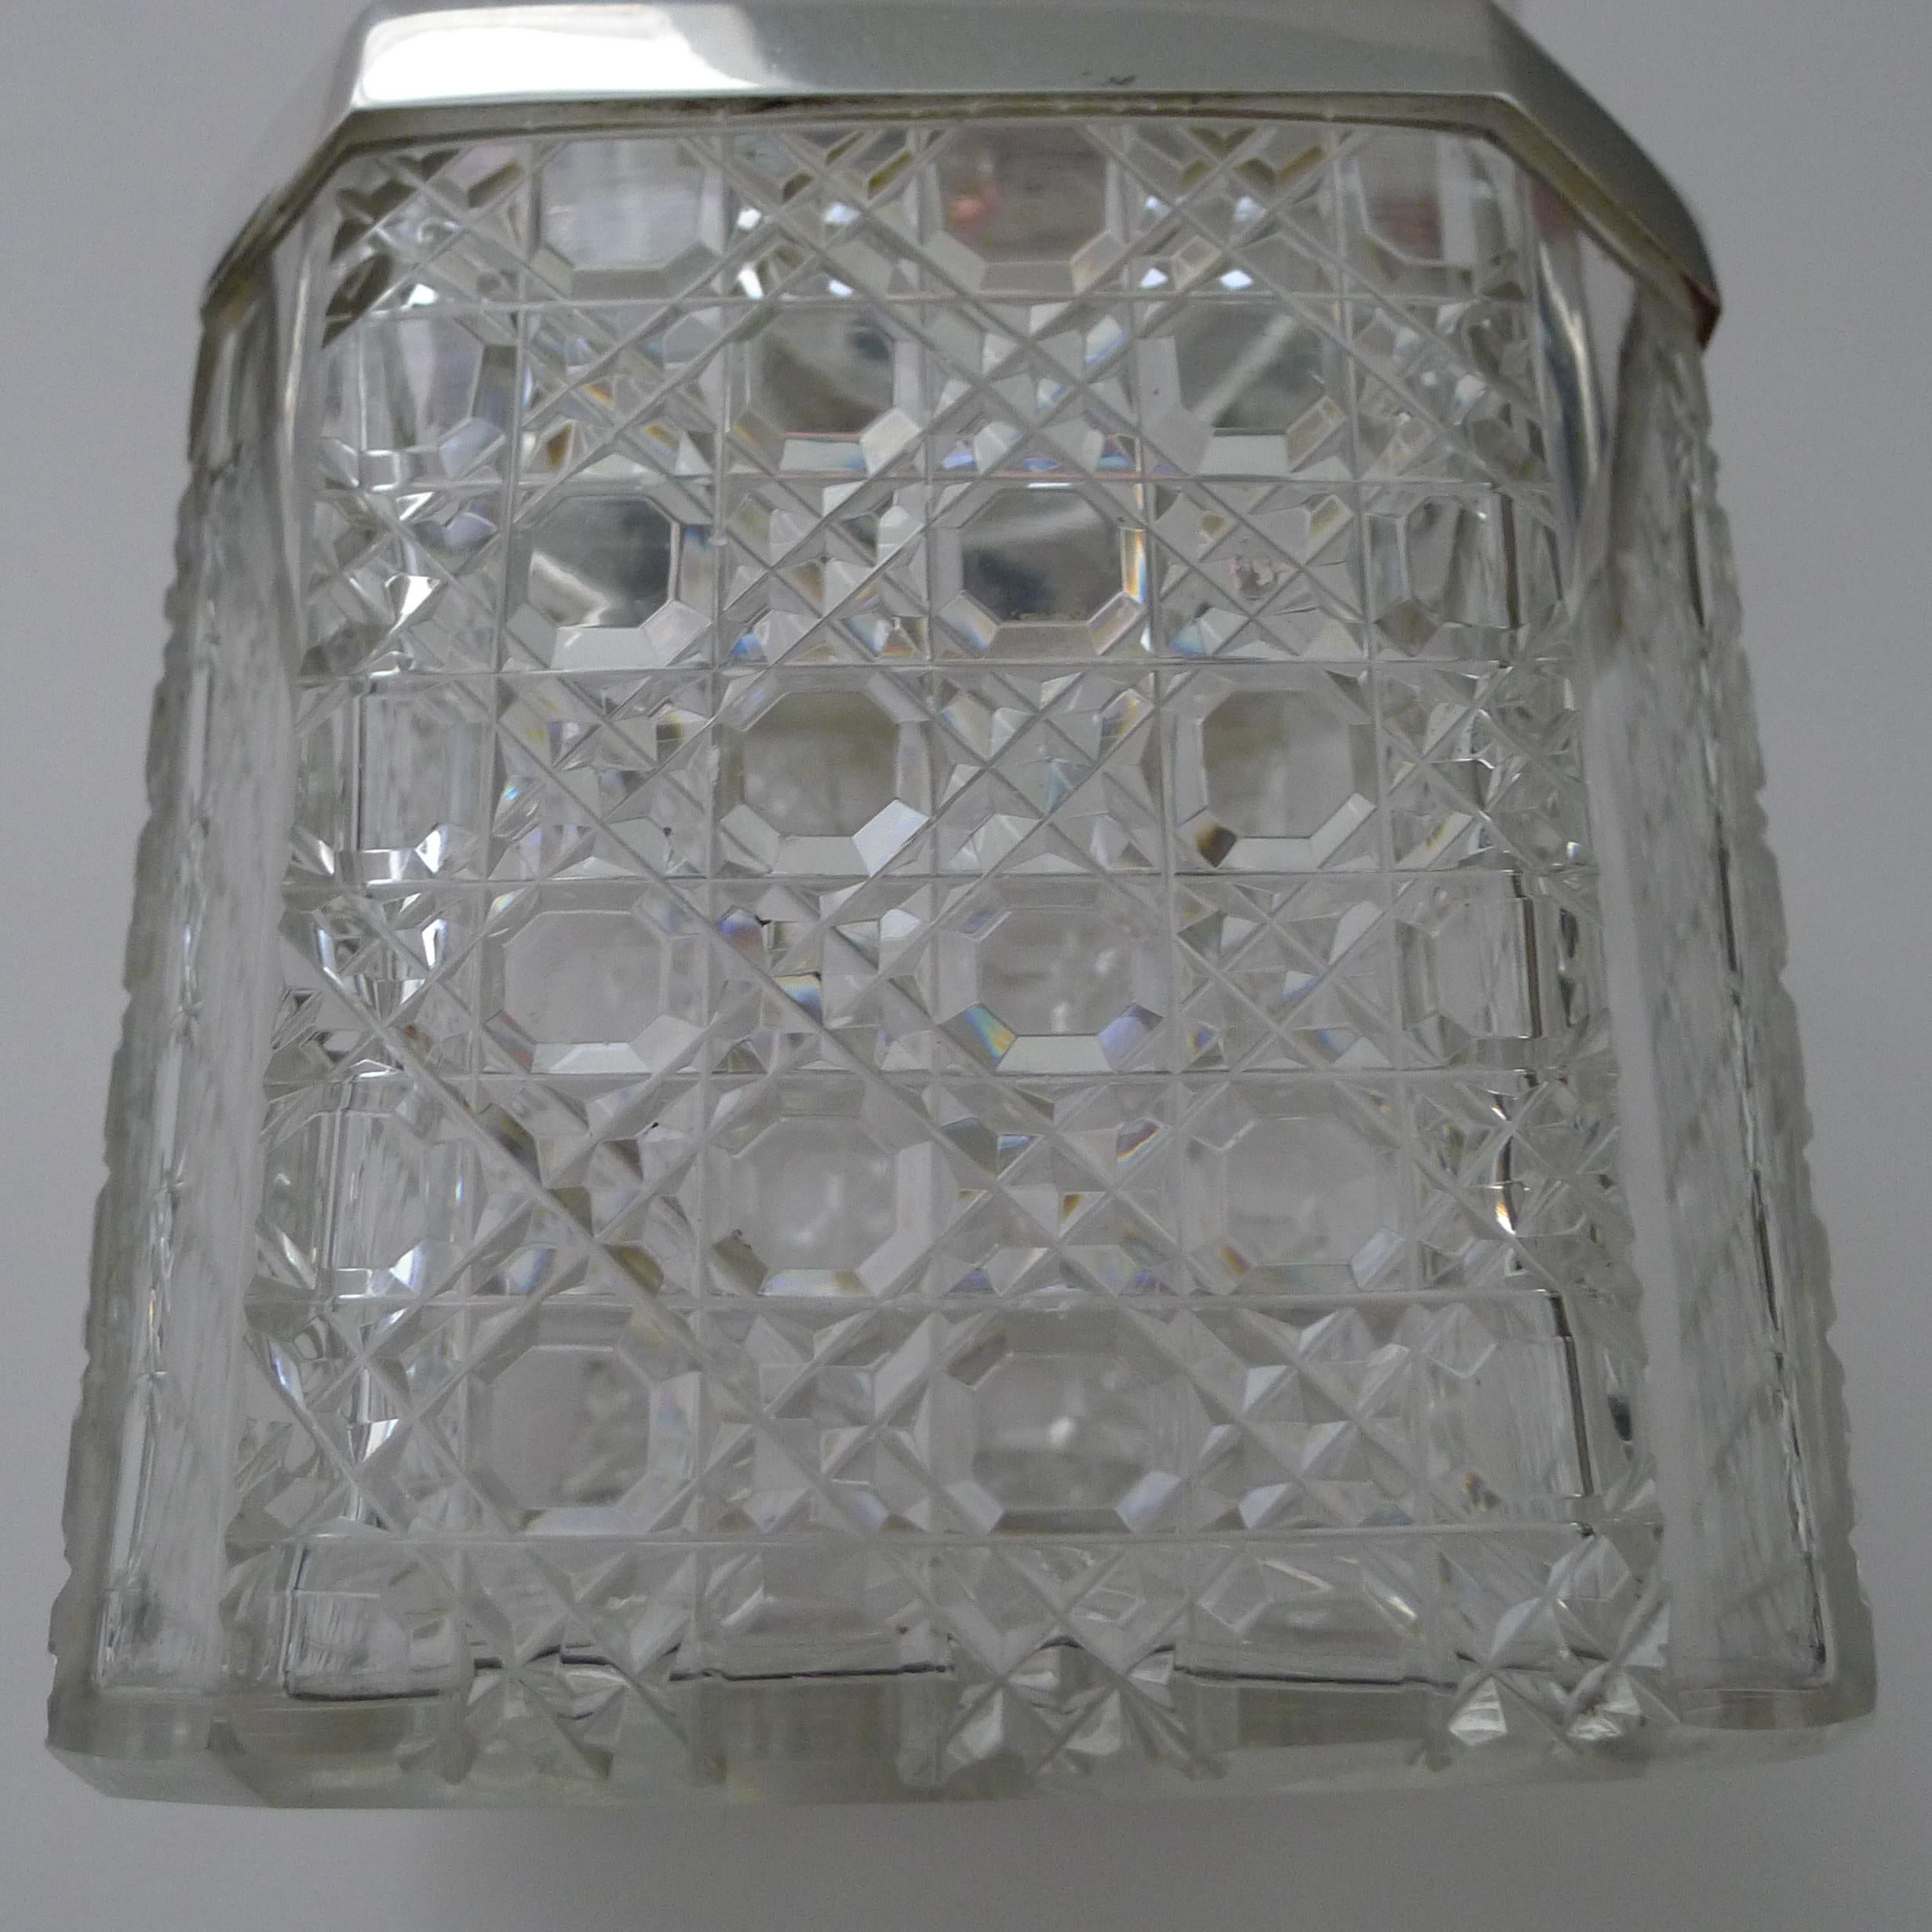 Late 19th Century Antique English Cut Crystal and Silver Plated Biscuit Box c.1890 For Sale